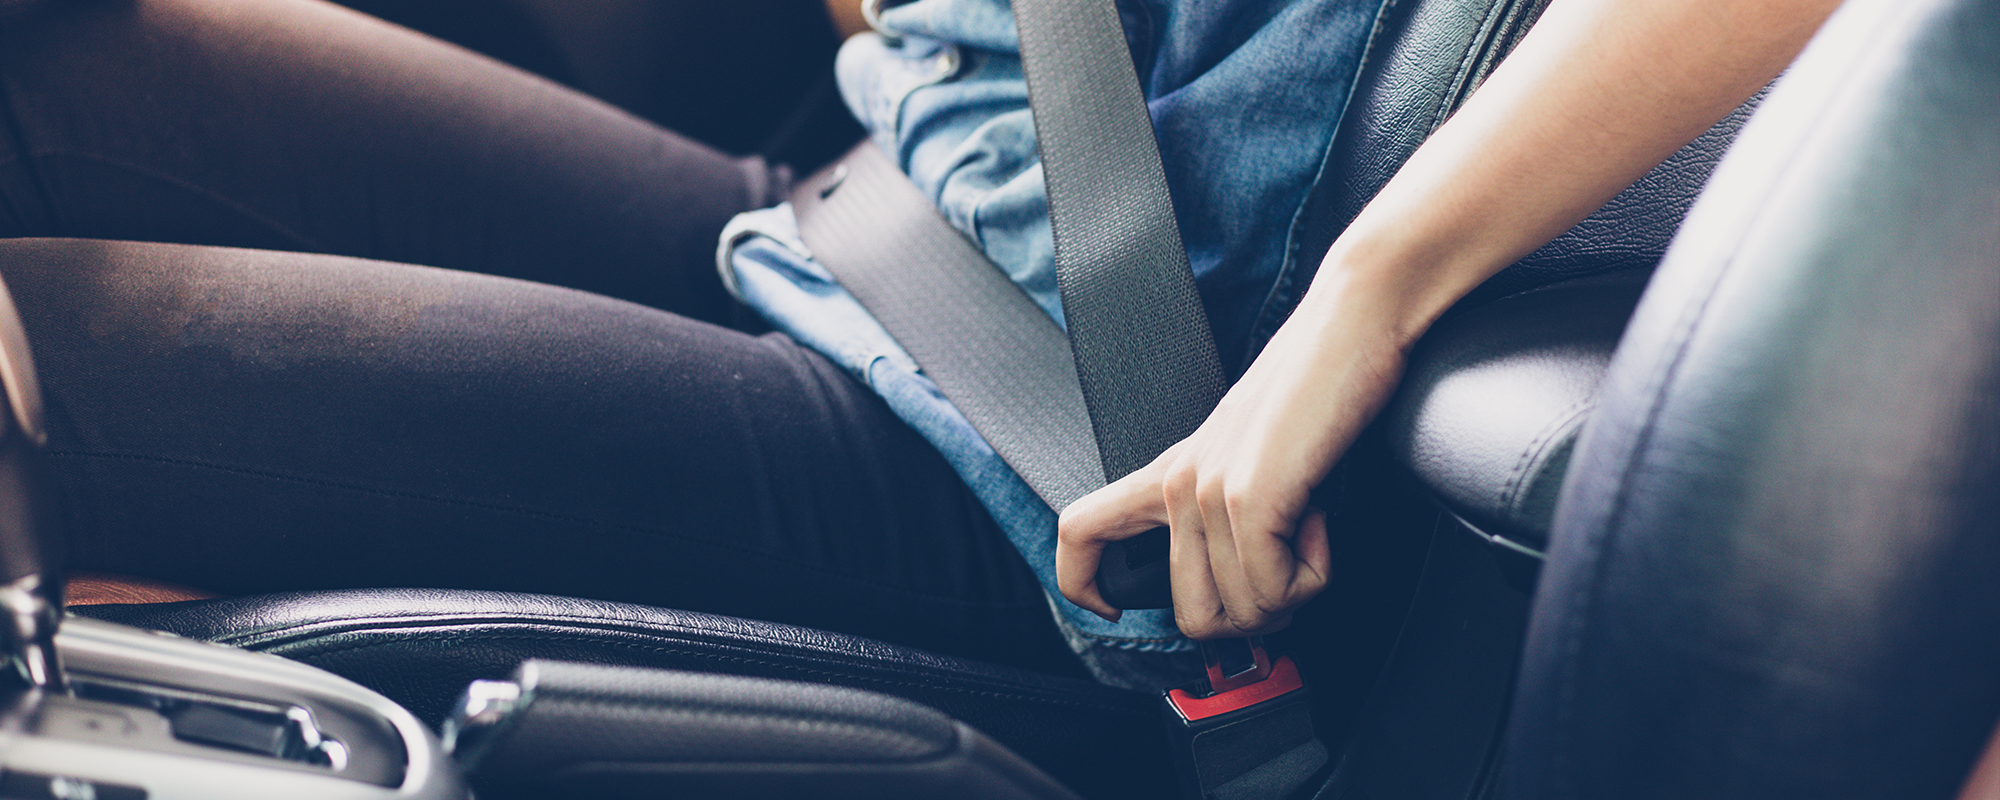 Image of a driver buckling their seatbelt